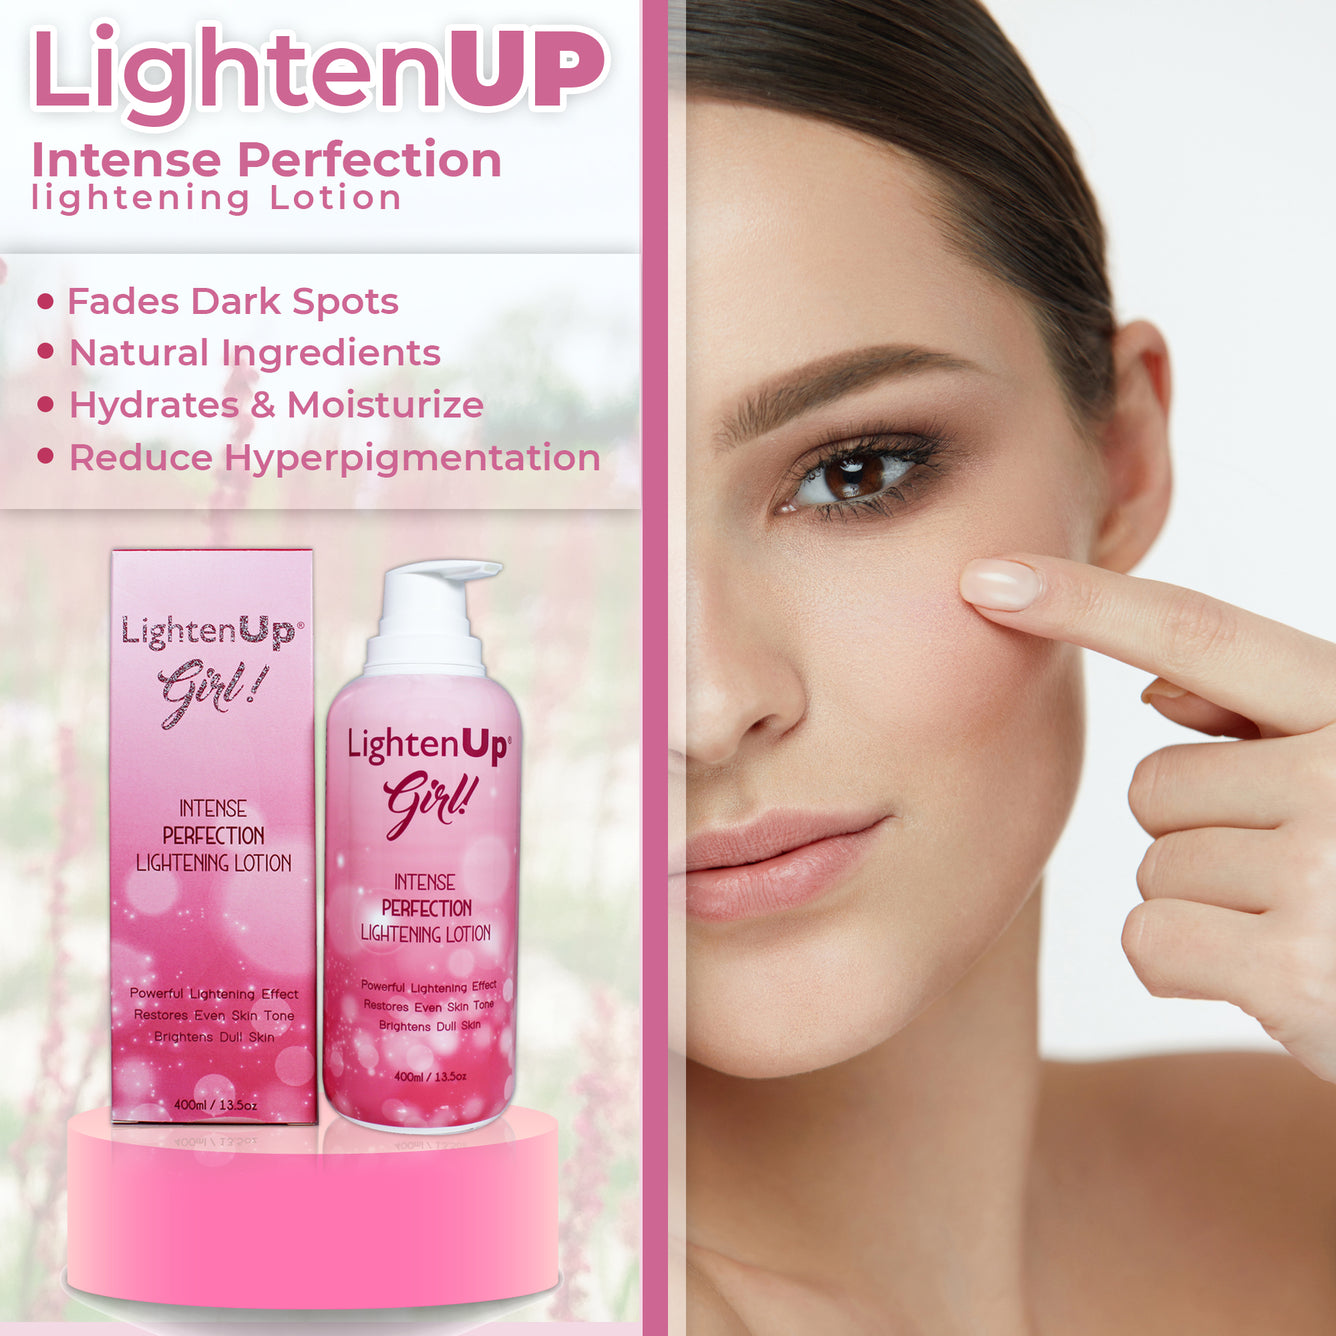 LightenUp Girl! Intense Perfection Lotion Mitchell Brands